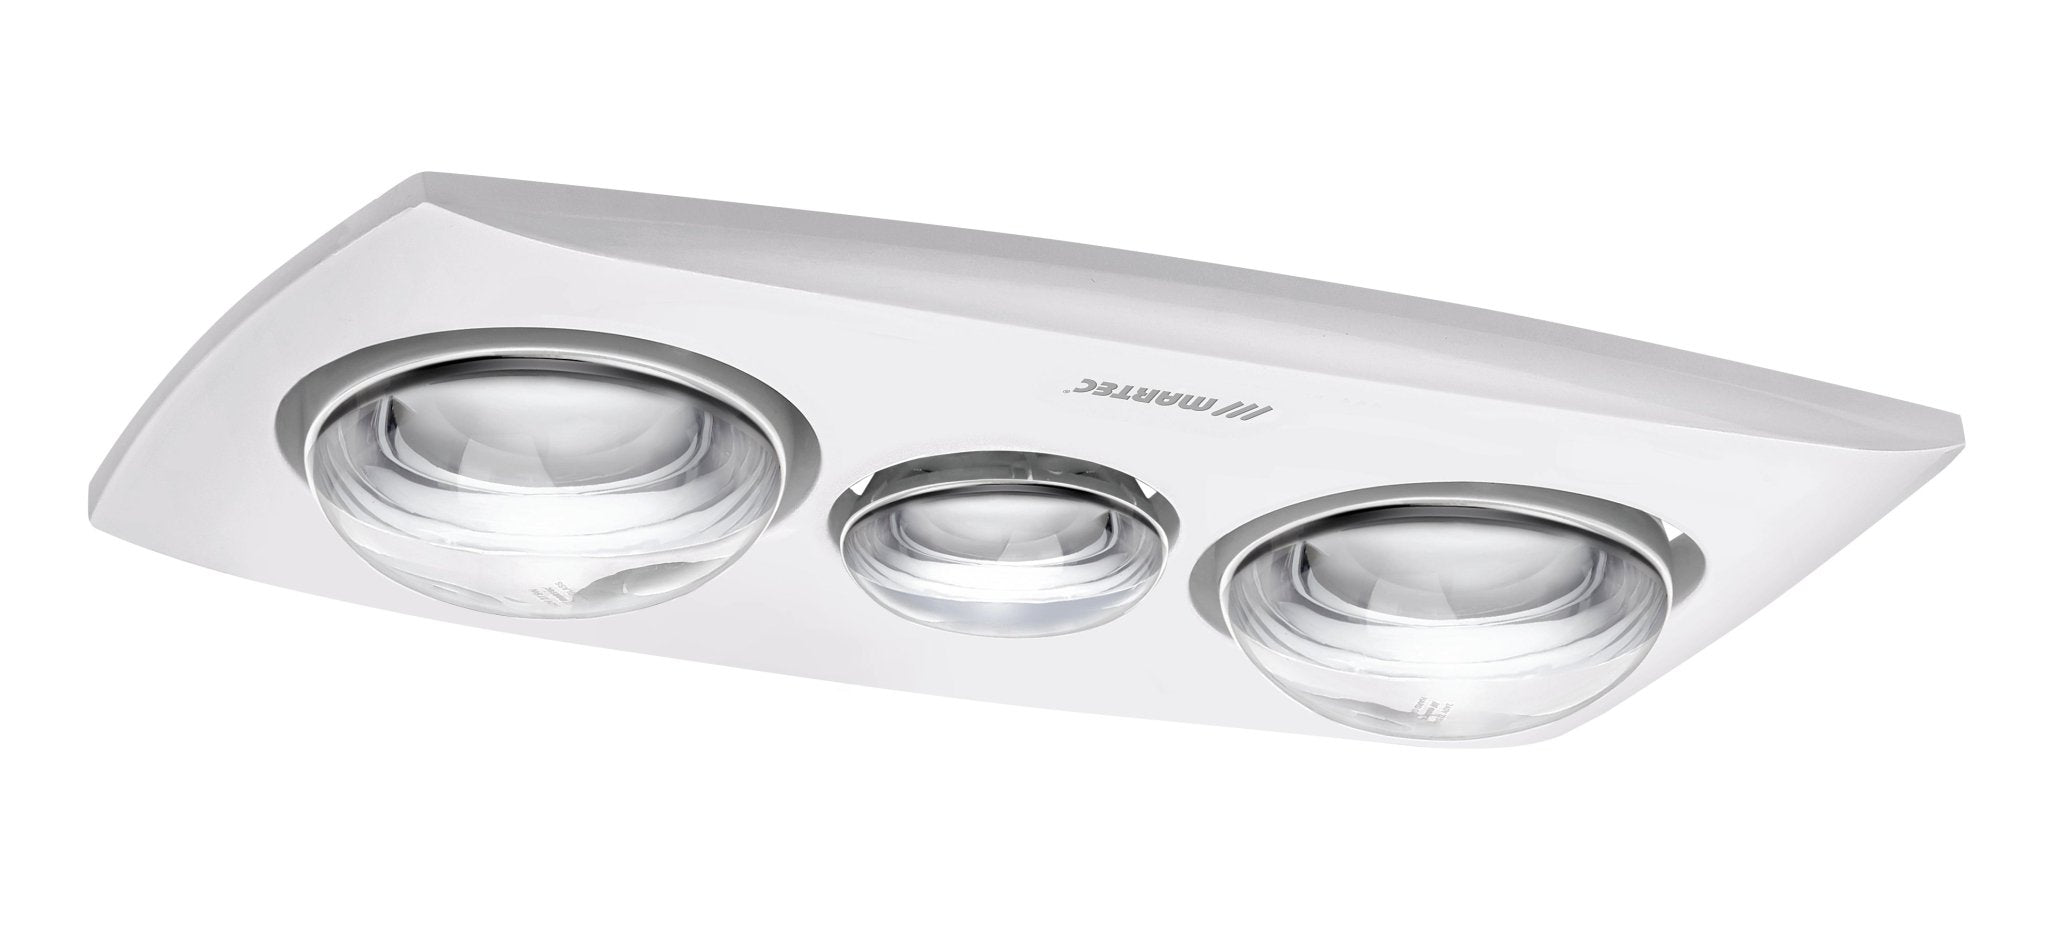 Martec Contour 2 Exhaust Fan 3-in-1 w/ 2x Heater & 1x LED Light in White - Mases LightingMartec